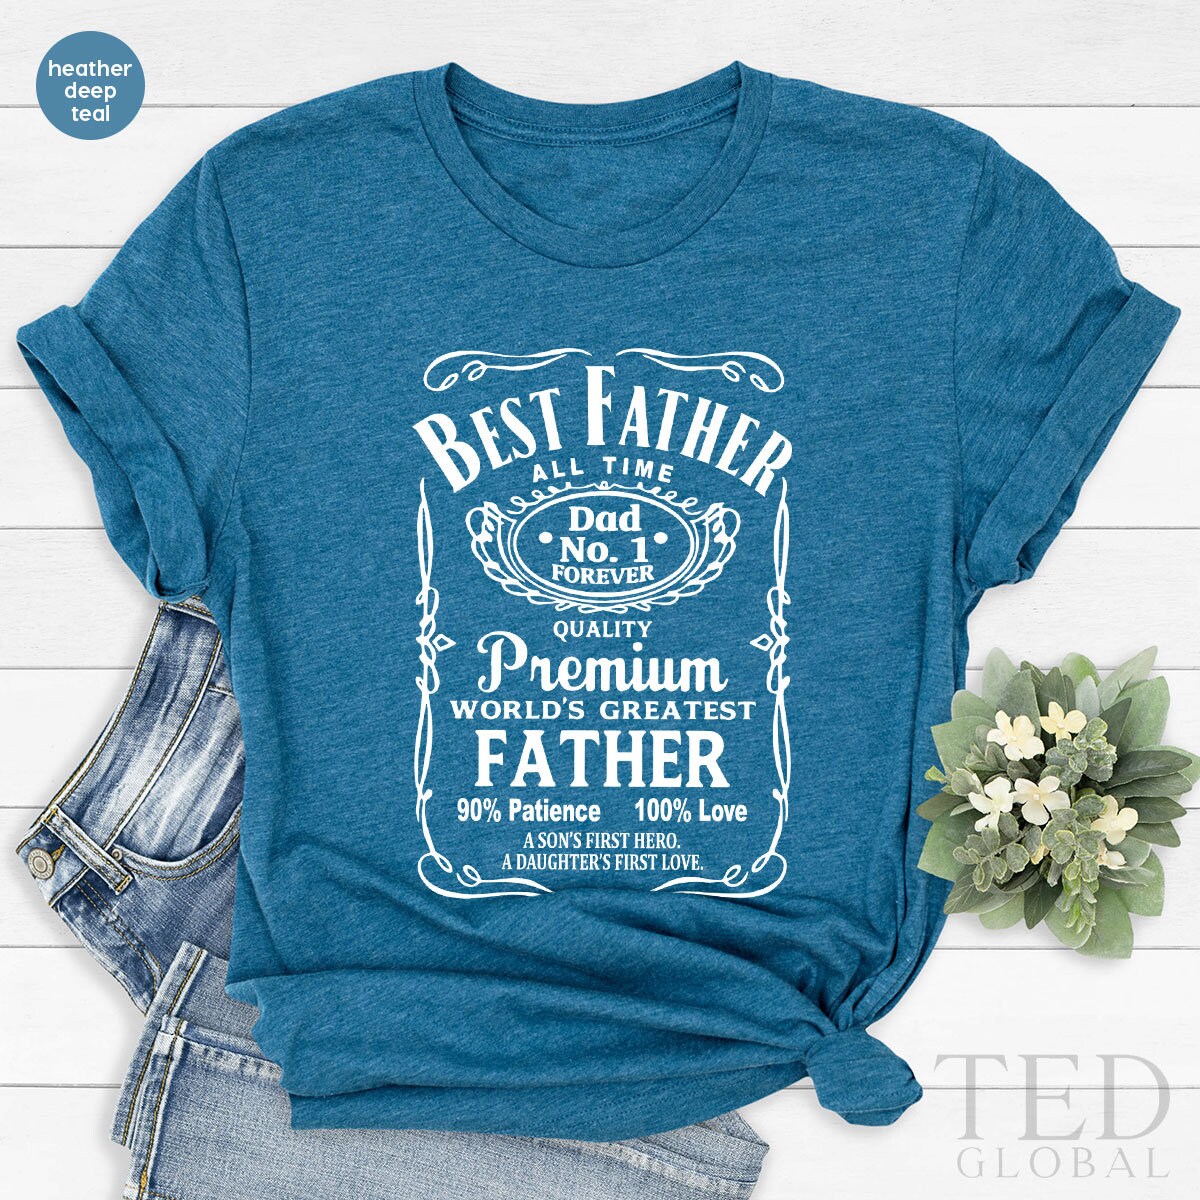 Best Father Shirt, Fathers Day Tee, Dad Shirt, Daddy T Shirt, Gifts For Dad, Worlds Greatest Father Shirt, Fathers Day Gift - Fastdeliverytees.com